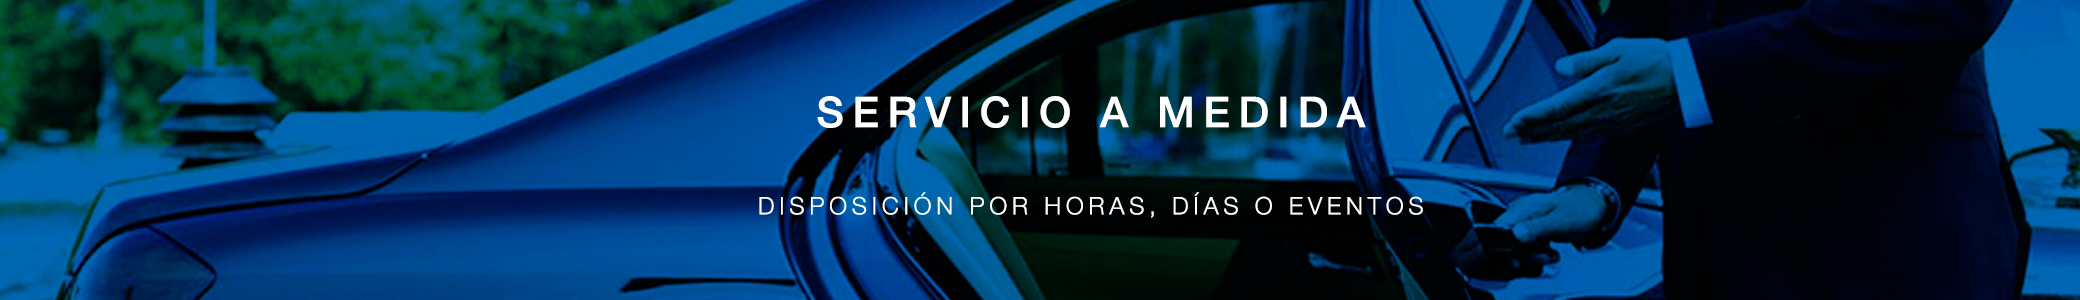 Chauffeured vehicles for hire throughout Spain